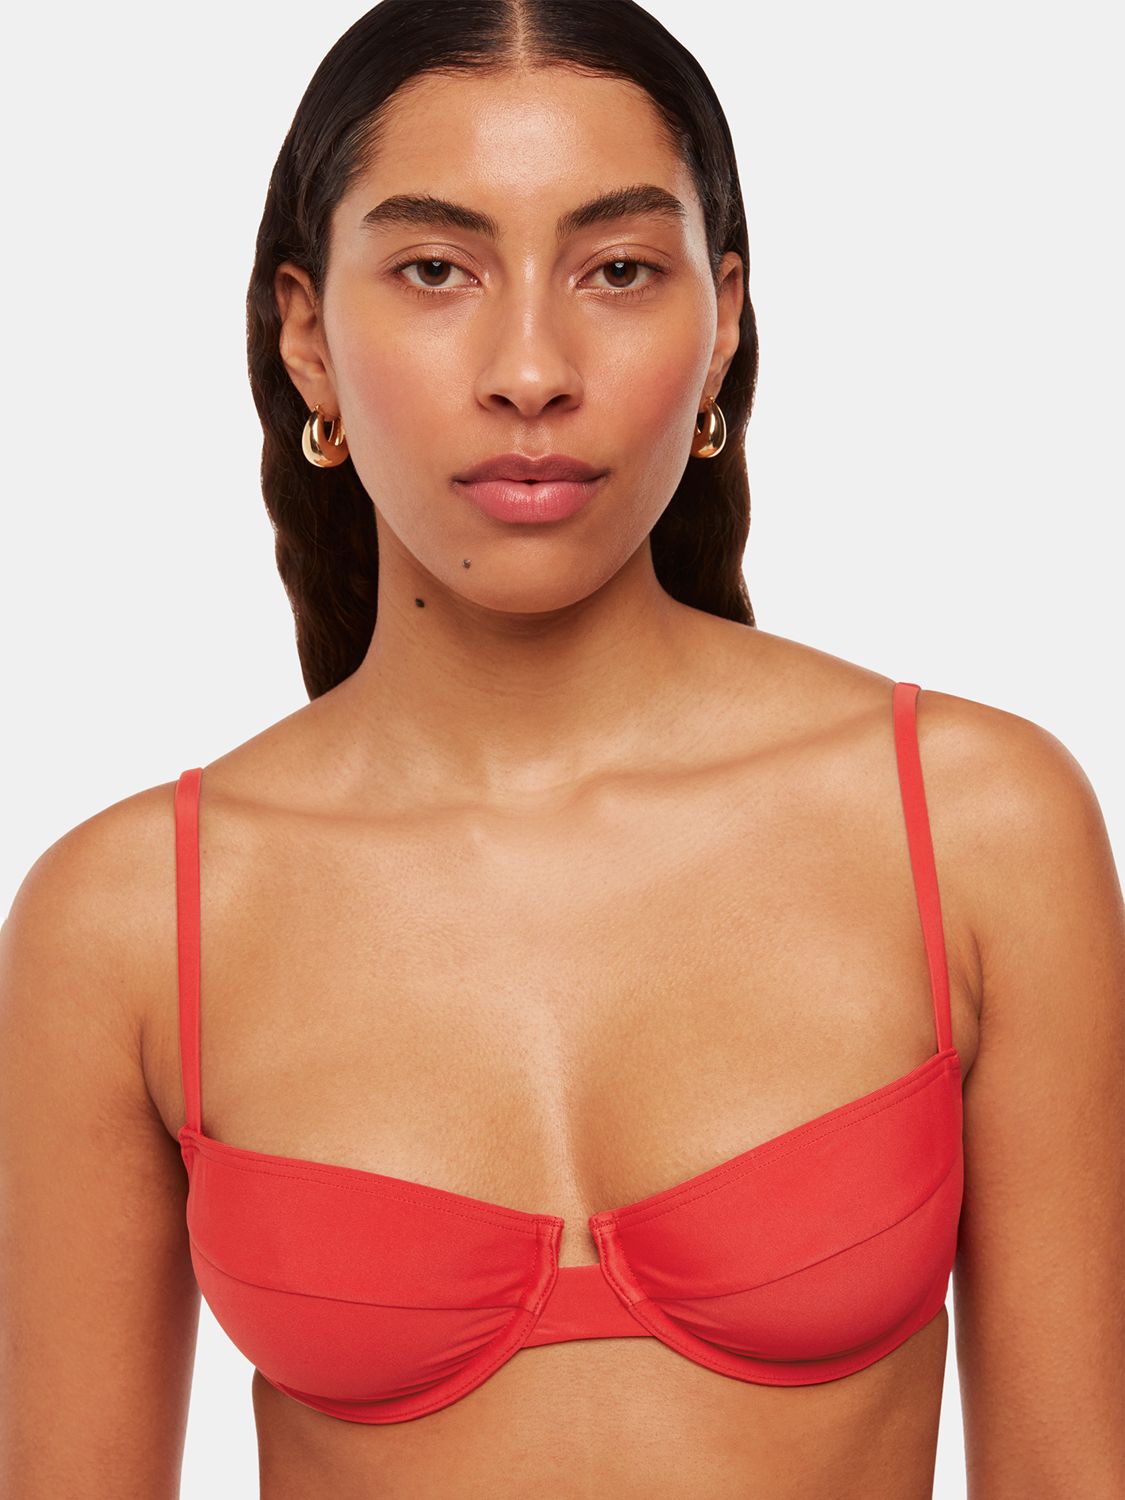 Whistles Lillie Underwired Bikini Top, Red, 6